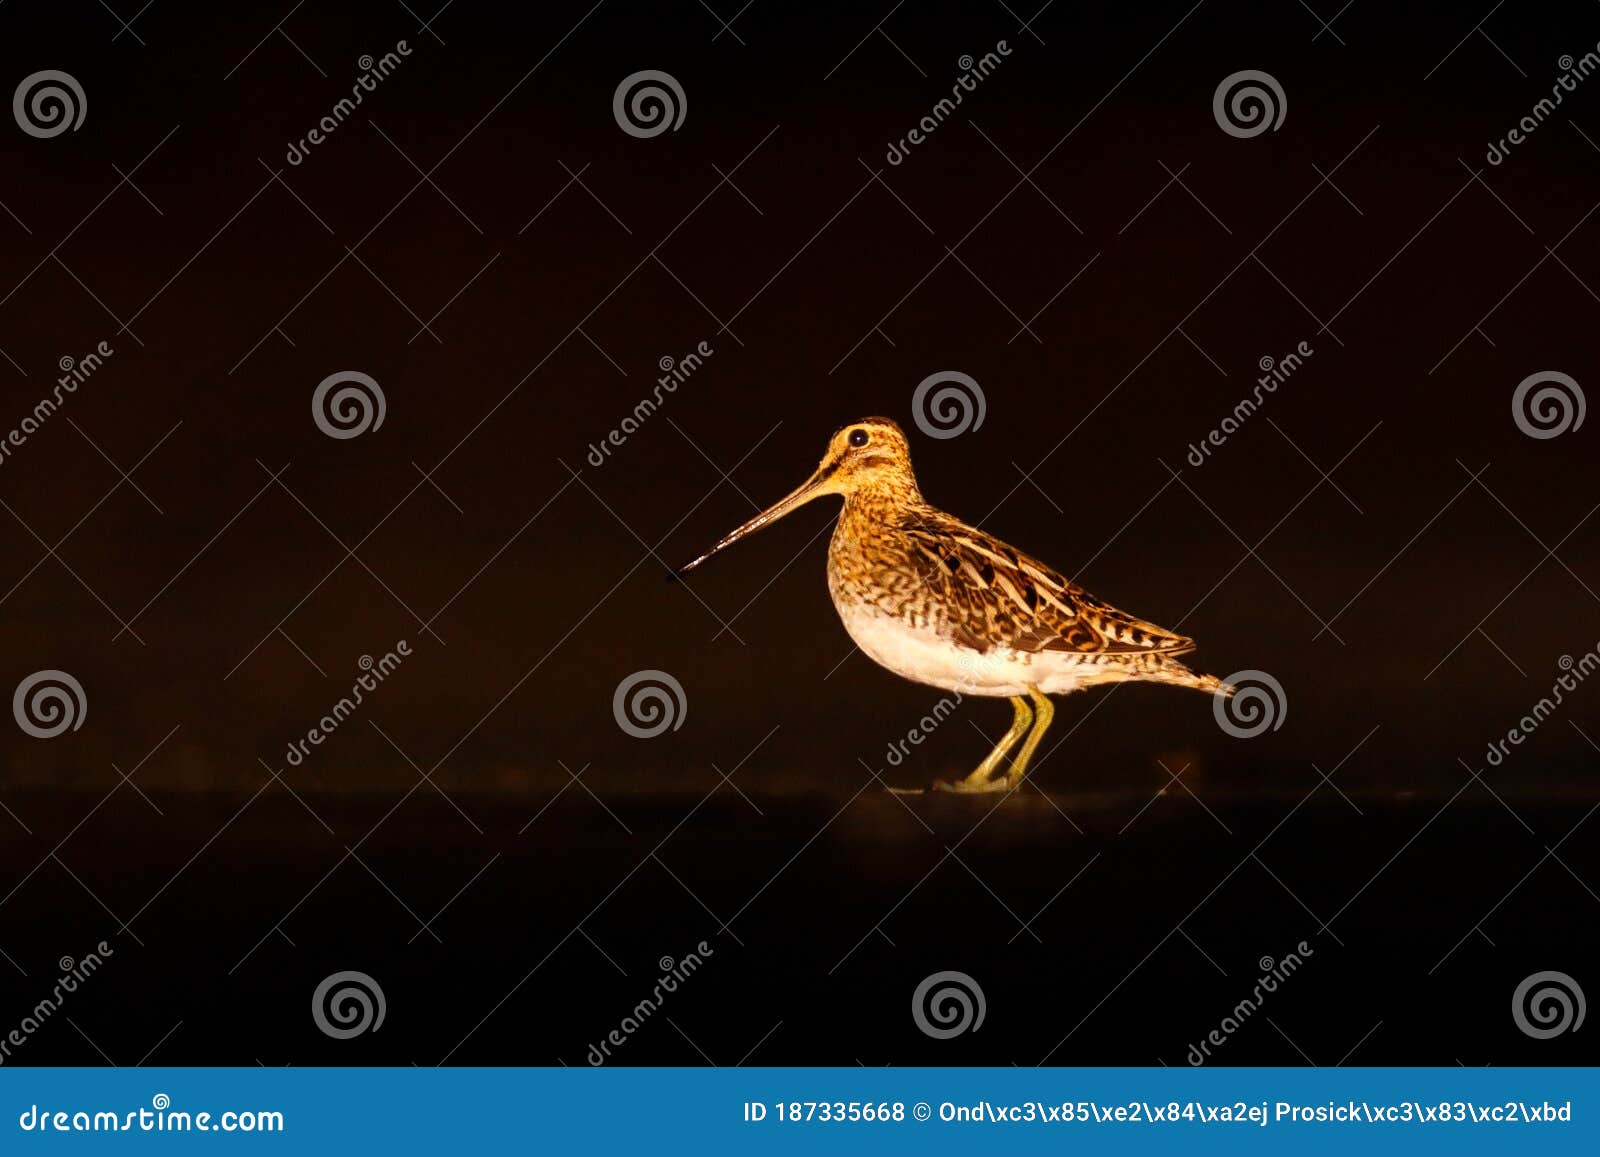 bird snipe, portrait in night, brdy, czech republic. wader bird with camouflage feathers colors. dark night with bird